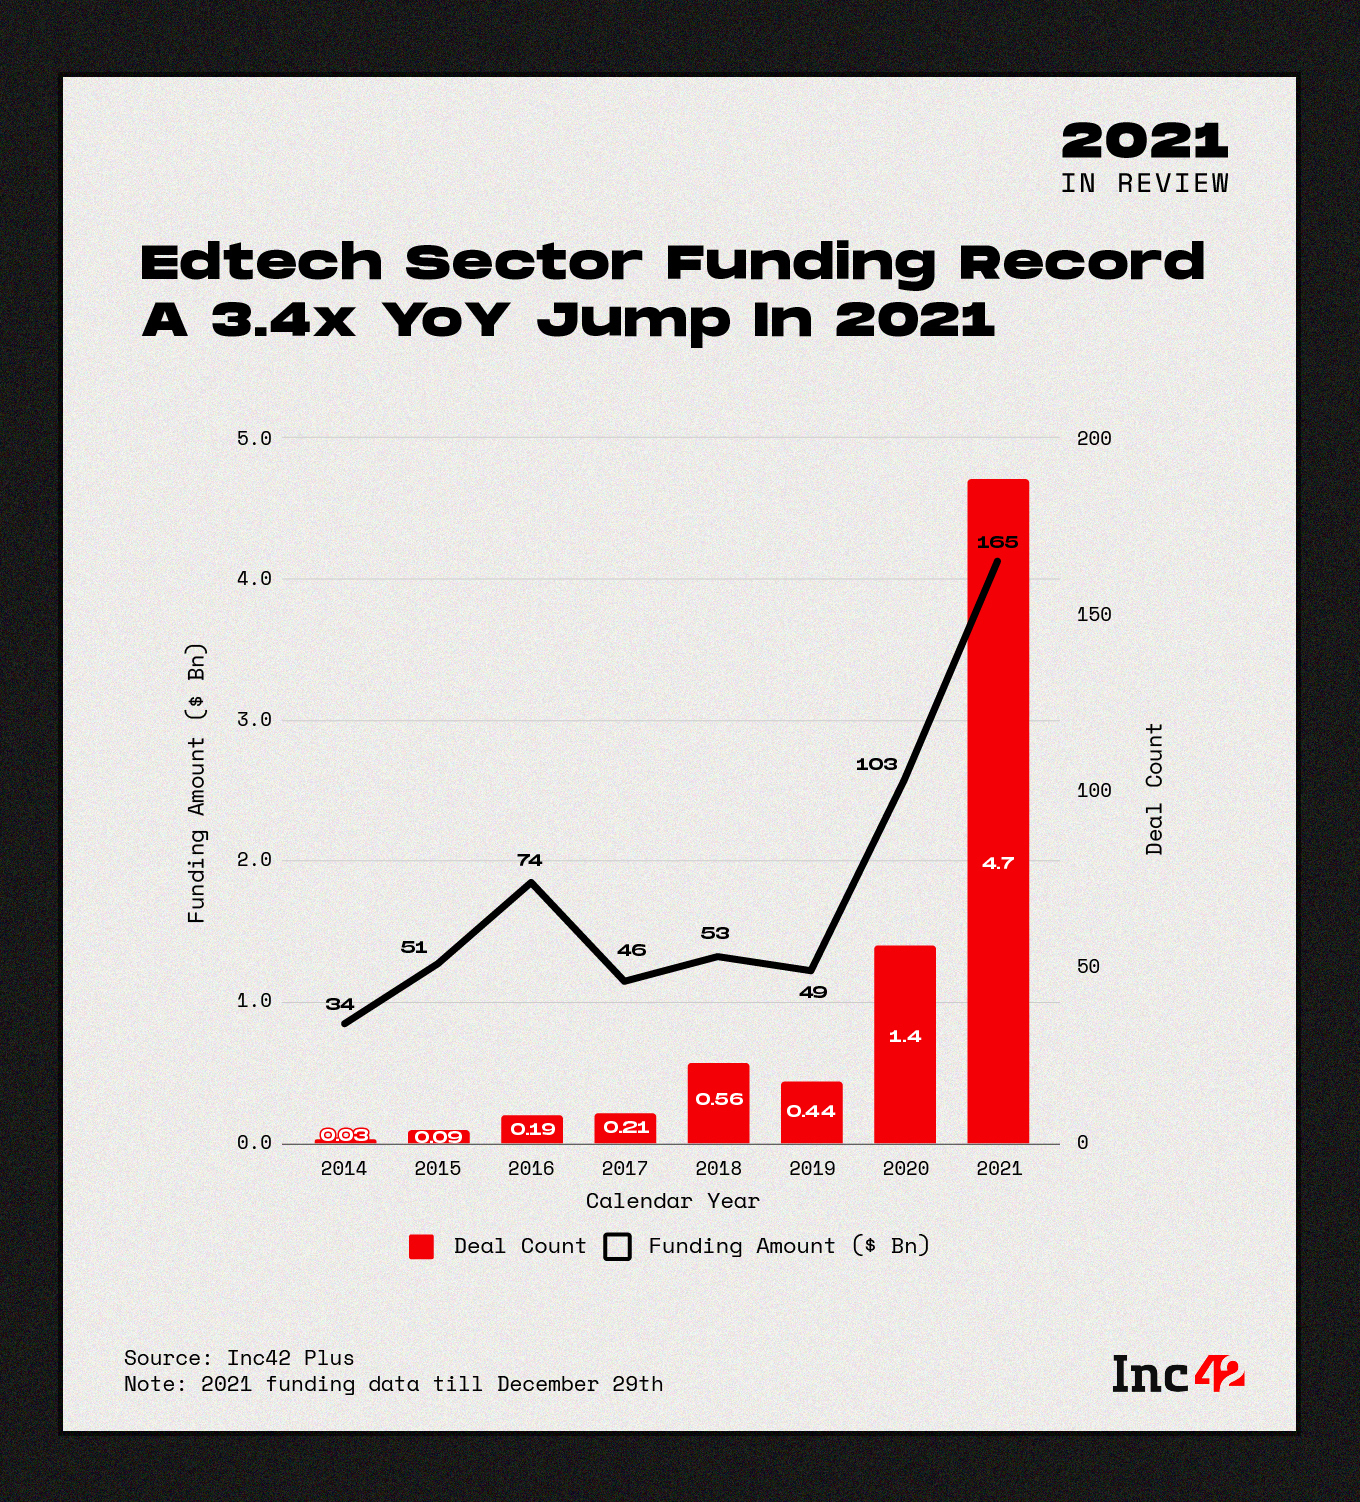 With 3 New Unicorns, India's Edtech Startups Raised $4.7 Bn In 2021